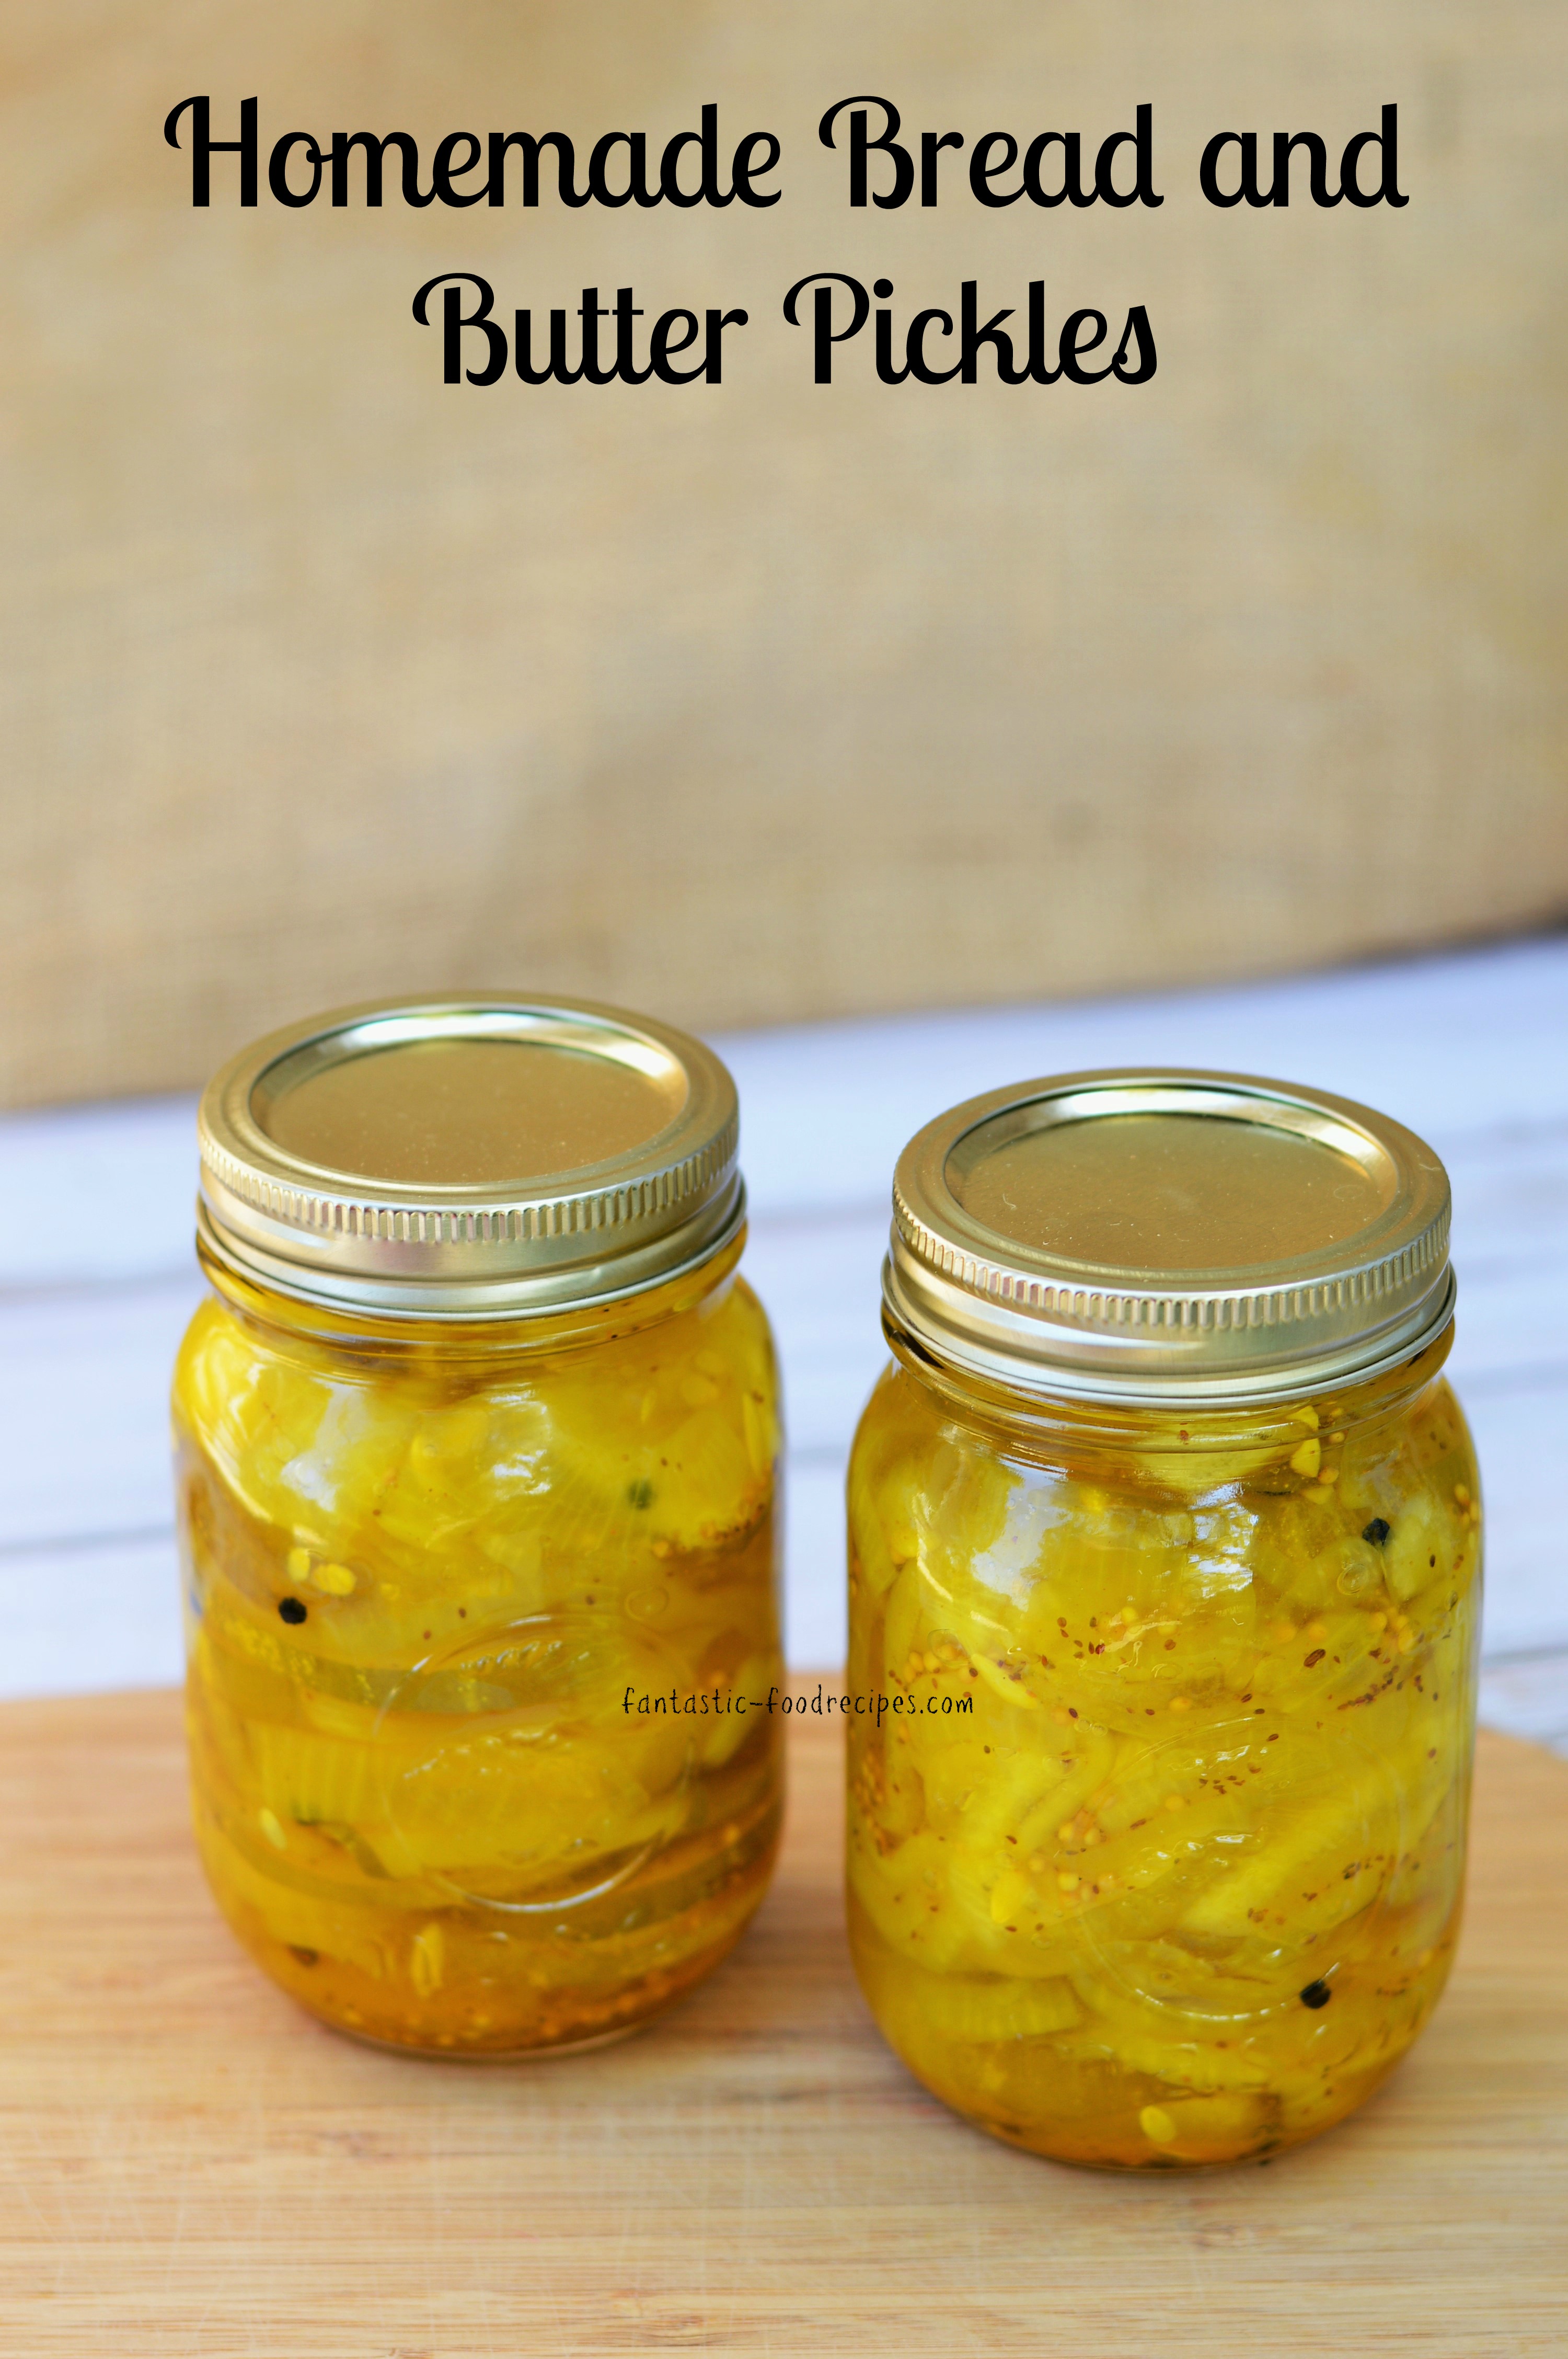 Homemade Bread and Butter Pickles<p><!-- adsense ad injection by Adsense Explosion failed - suspected violation of Policy Content (https://support.google.com/adsense/bin/answer.py?stc=aspe-1pp-it&answer=48182) - detect < hot > word ( into hot jars and l)--></p>